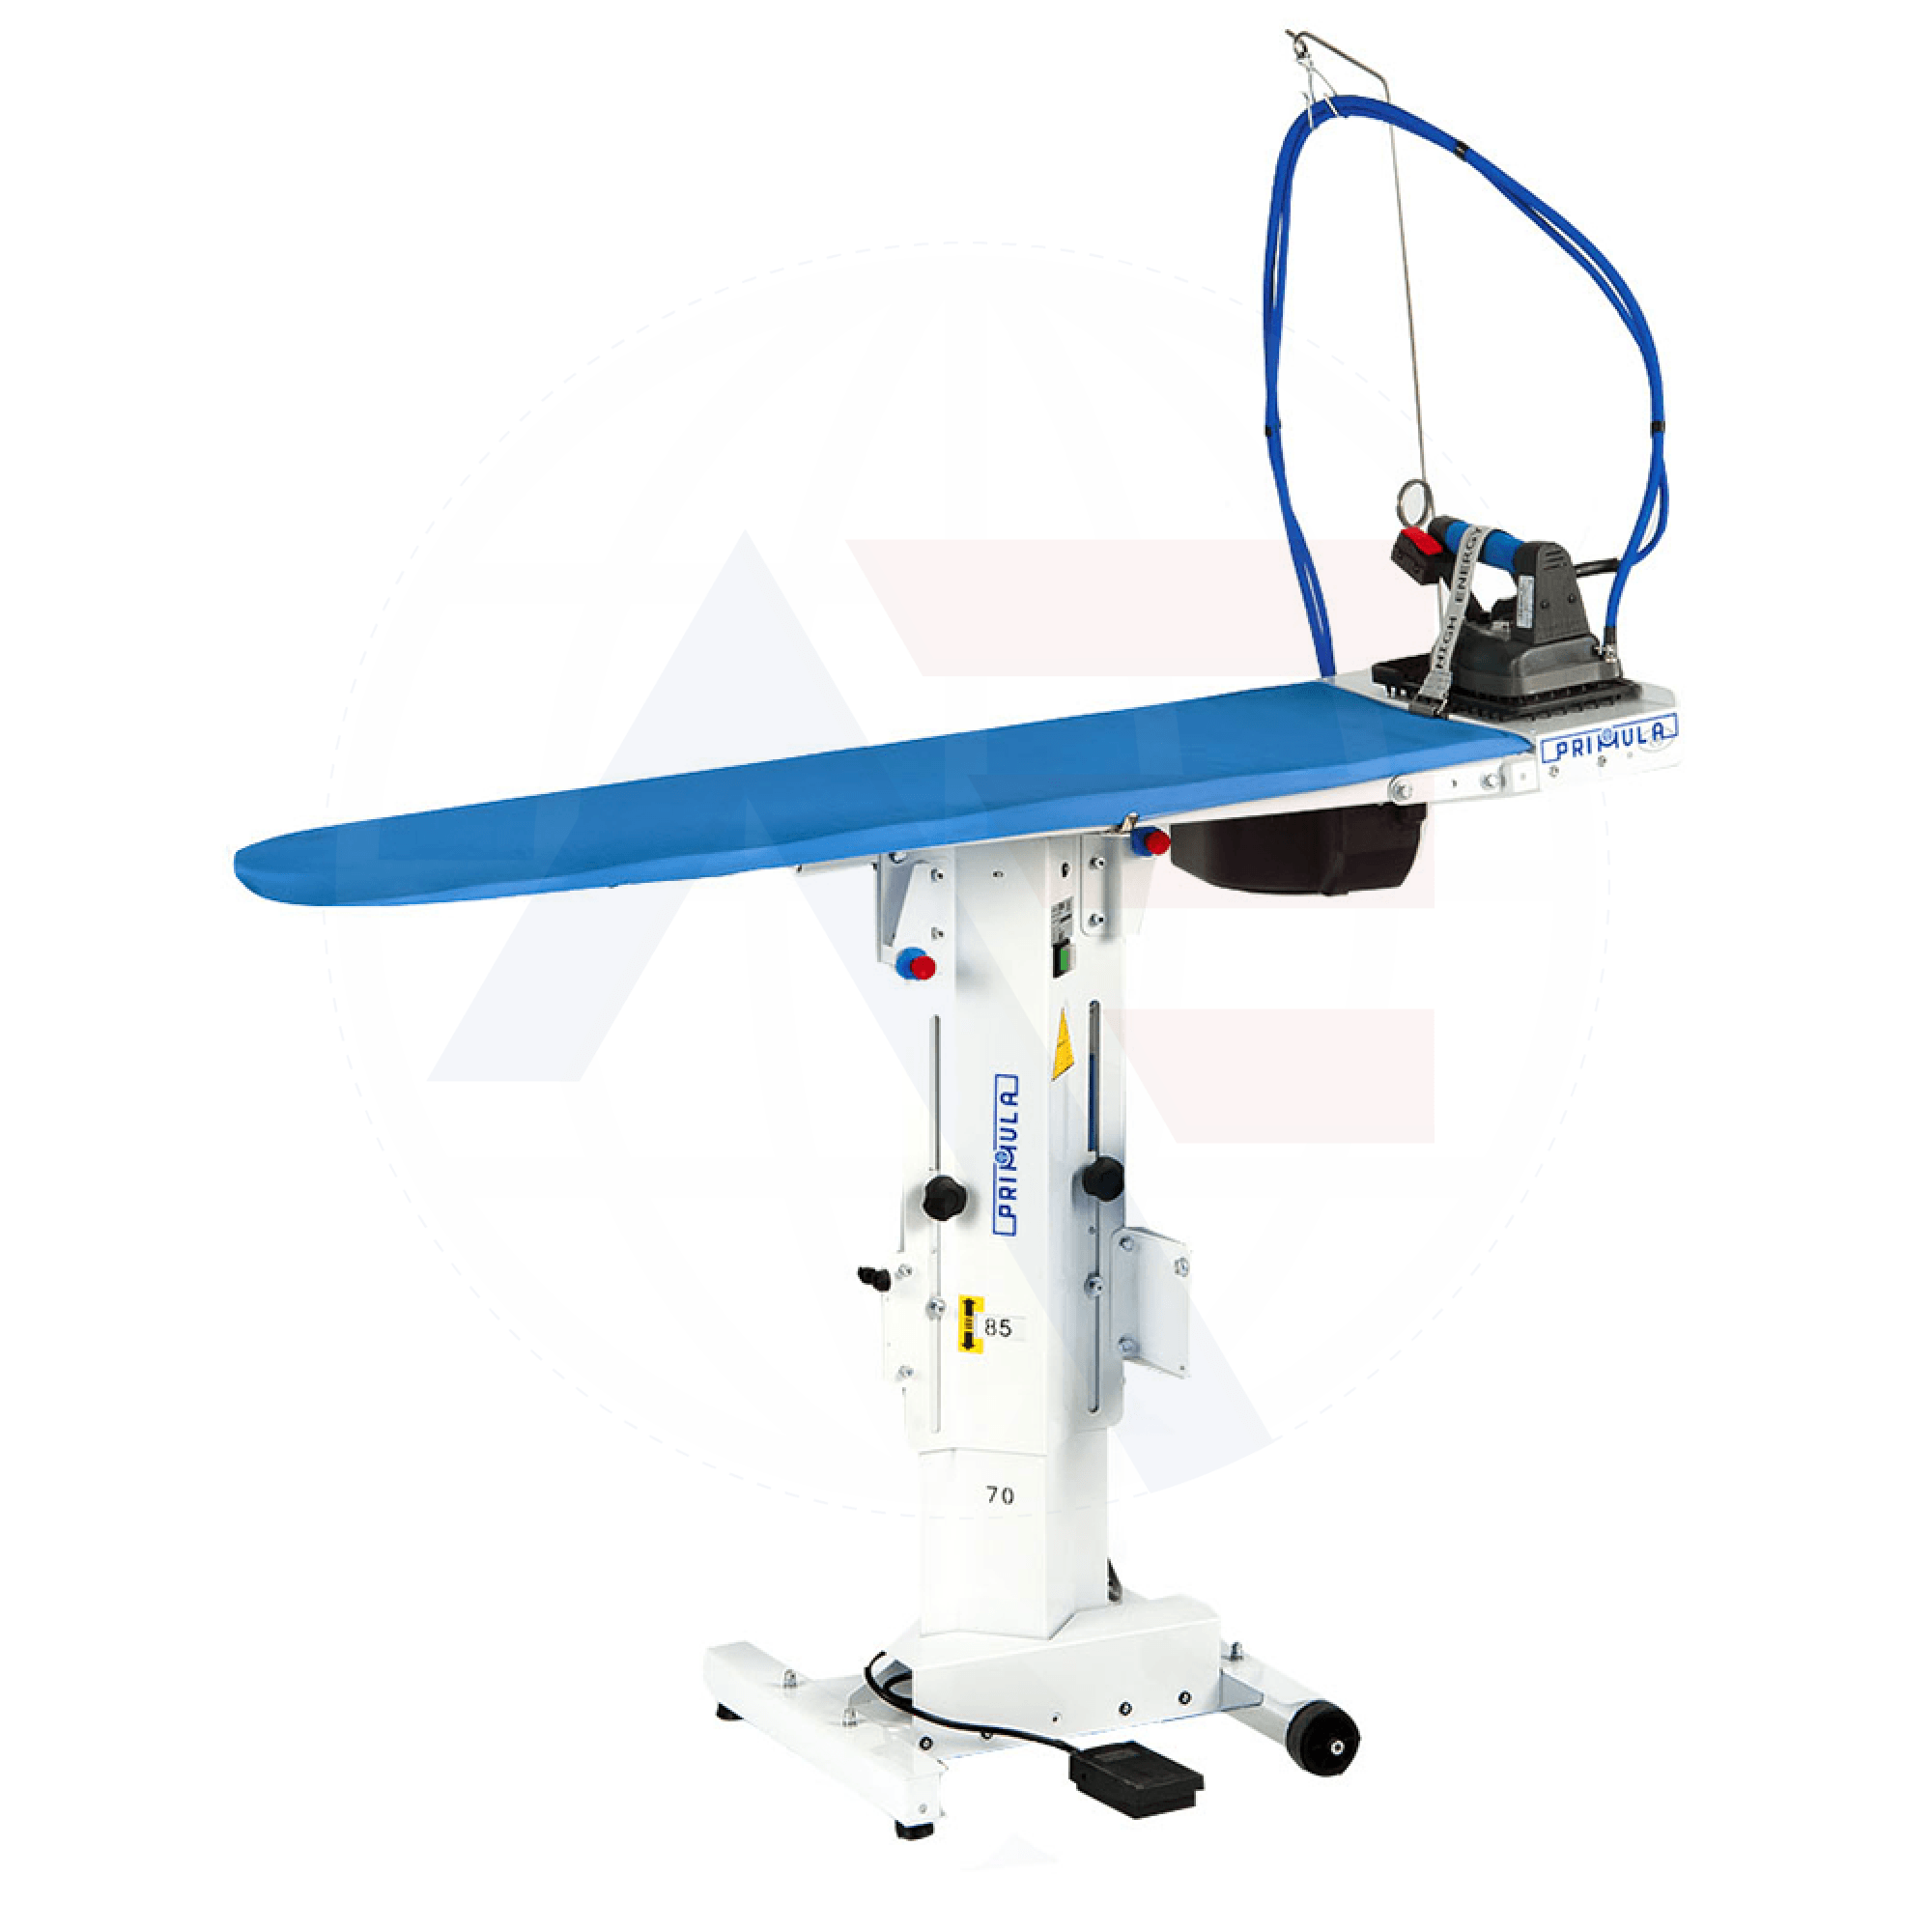 Primula Tv3811 Ironing Table With Heating Suction Blowing And Adjustable Height Pressing Equipment